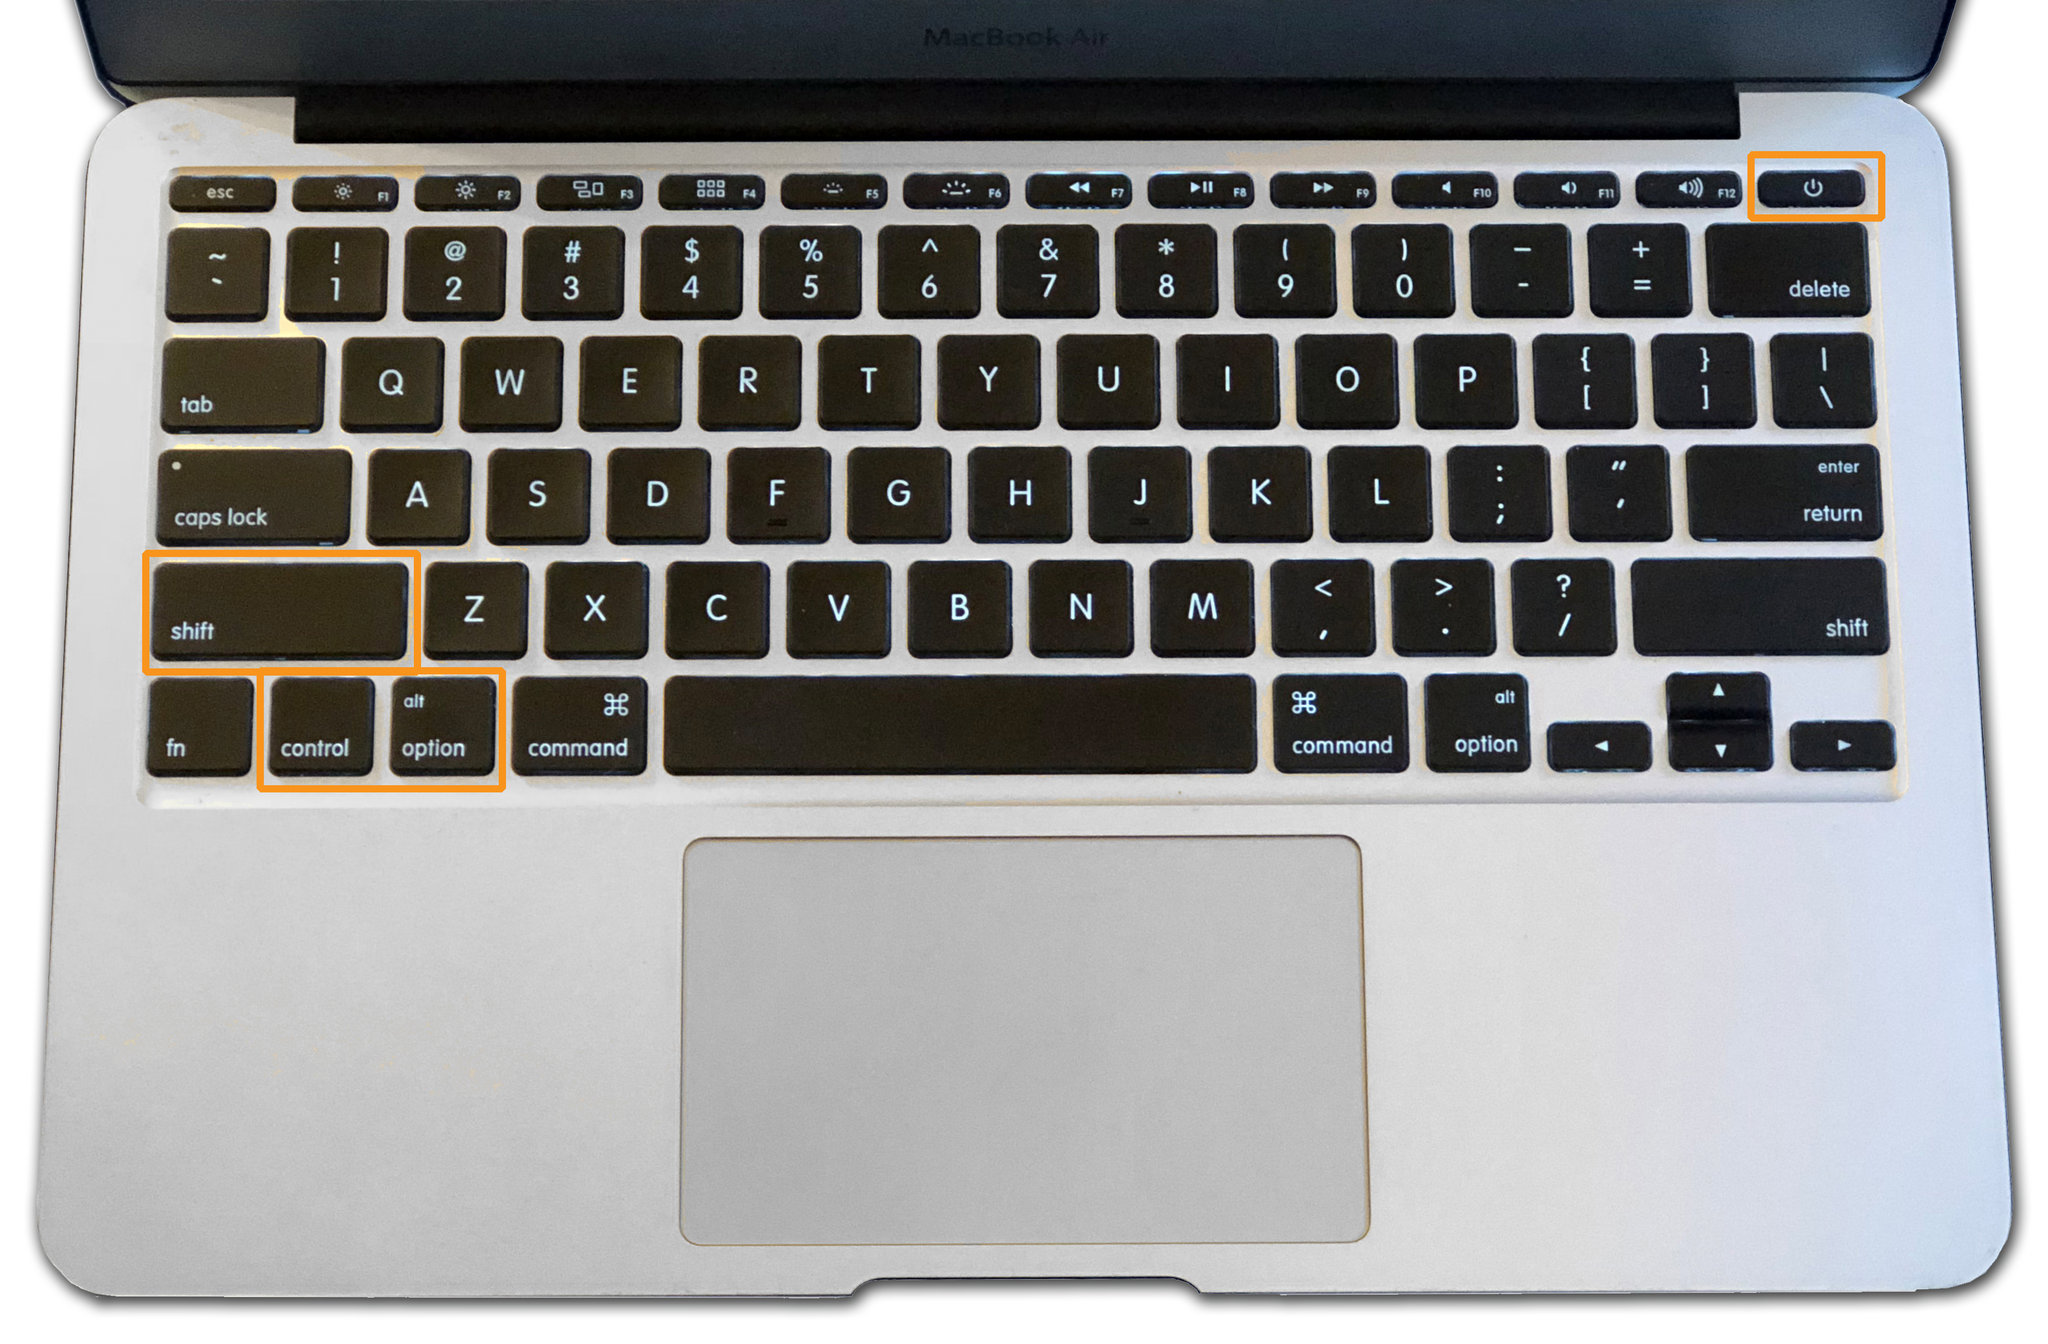 While holding these keys, press the power button and hold it for 10 seconds.
Release all keys and the power button.